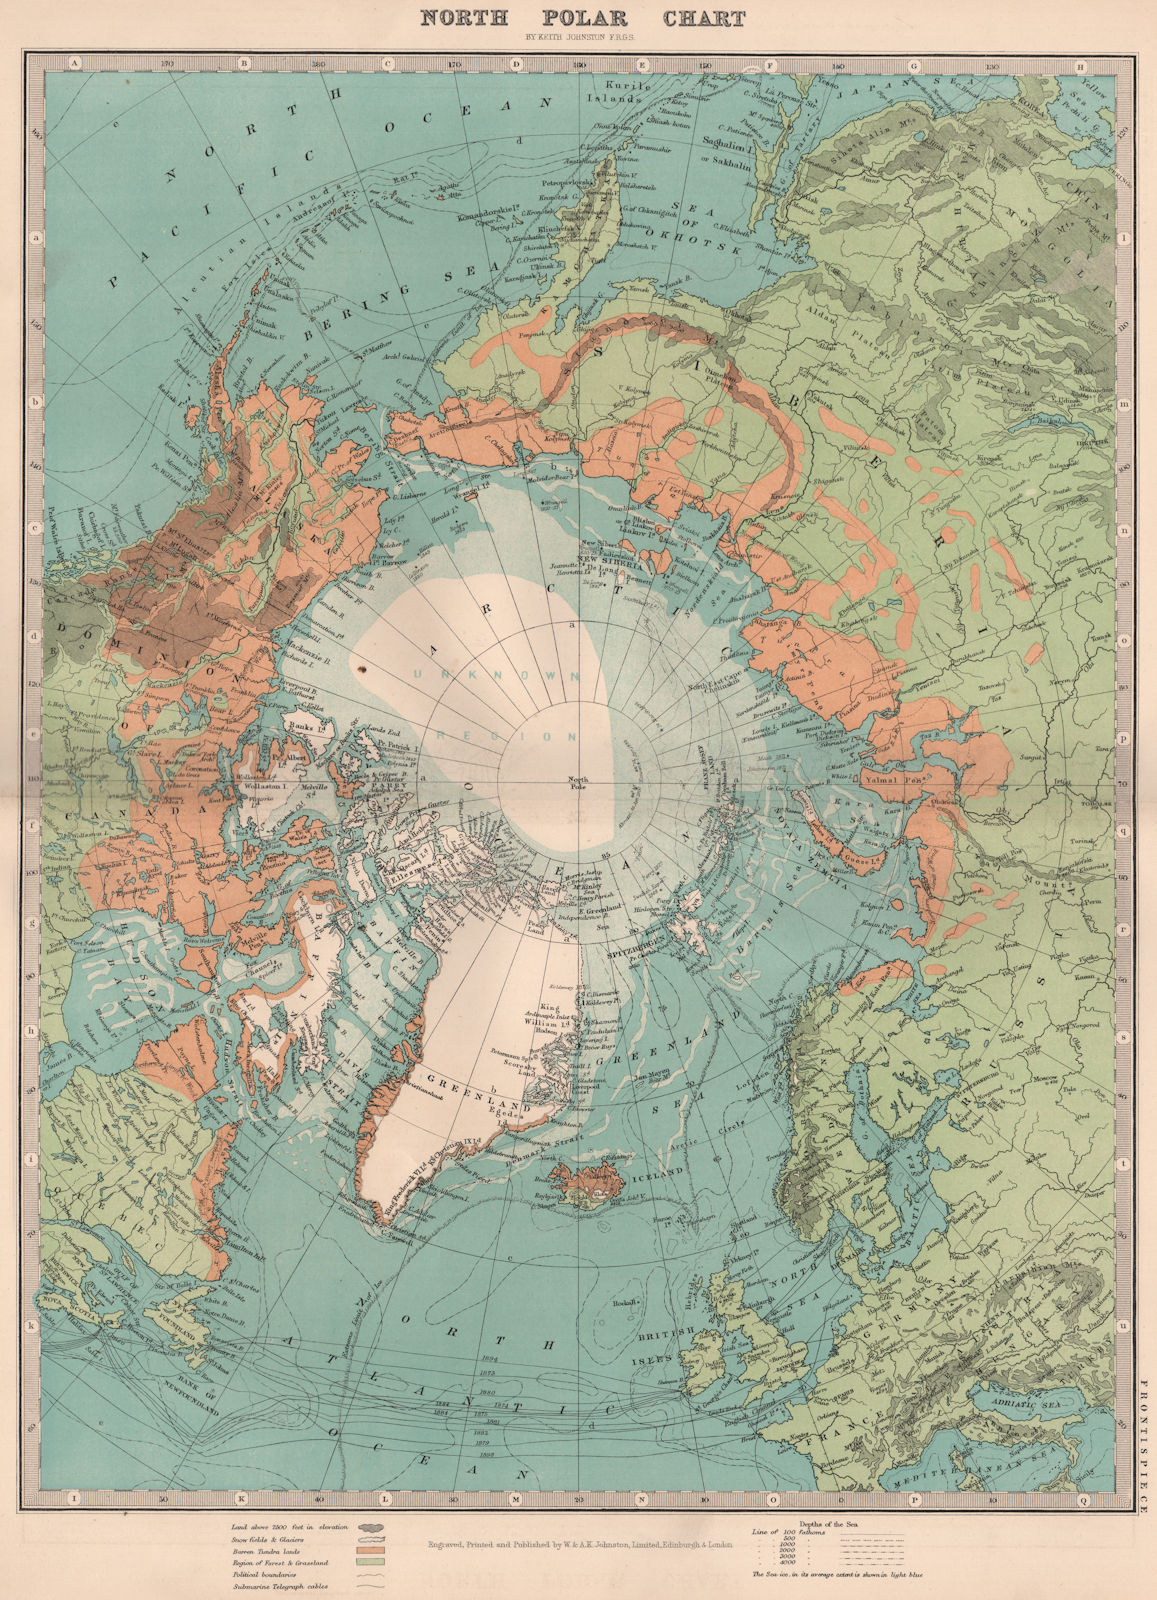 ARCTIC. North Polar chart. Telegraph cables. Ice limit. JOHNSTON 1906 old map